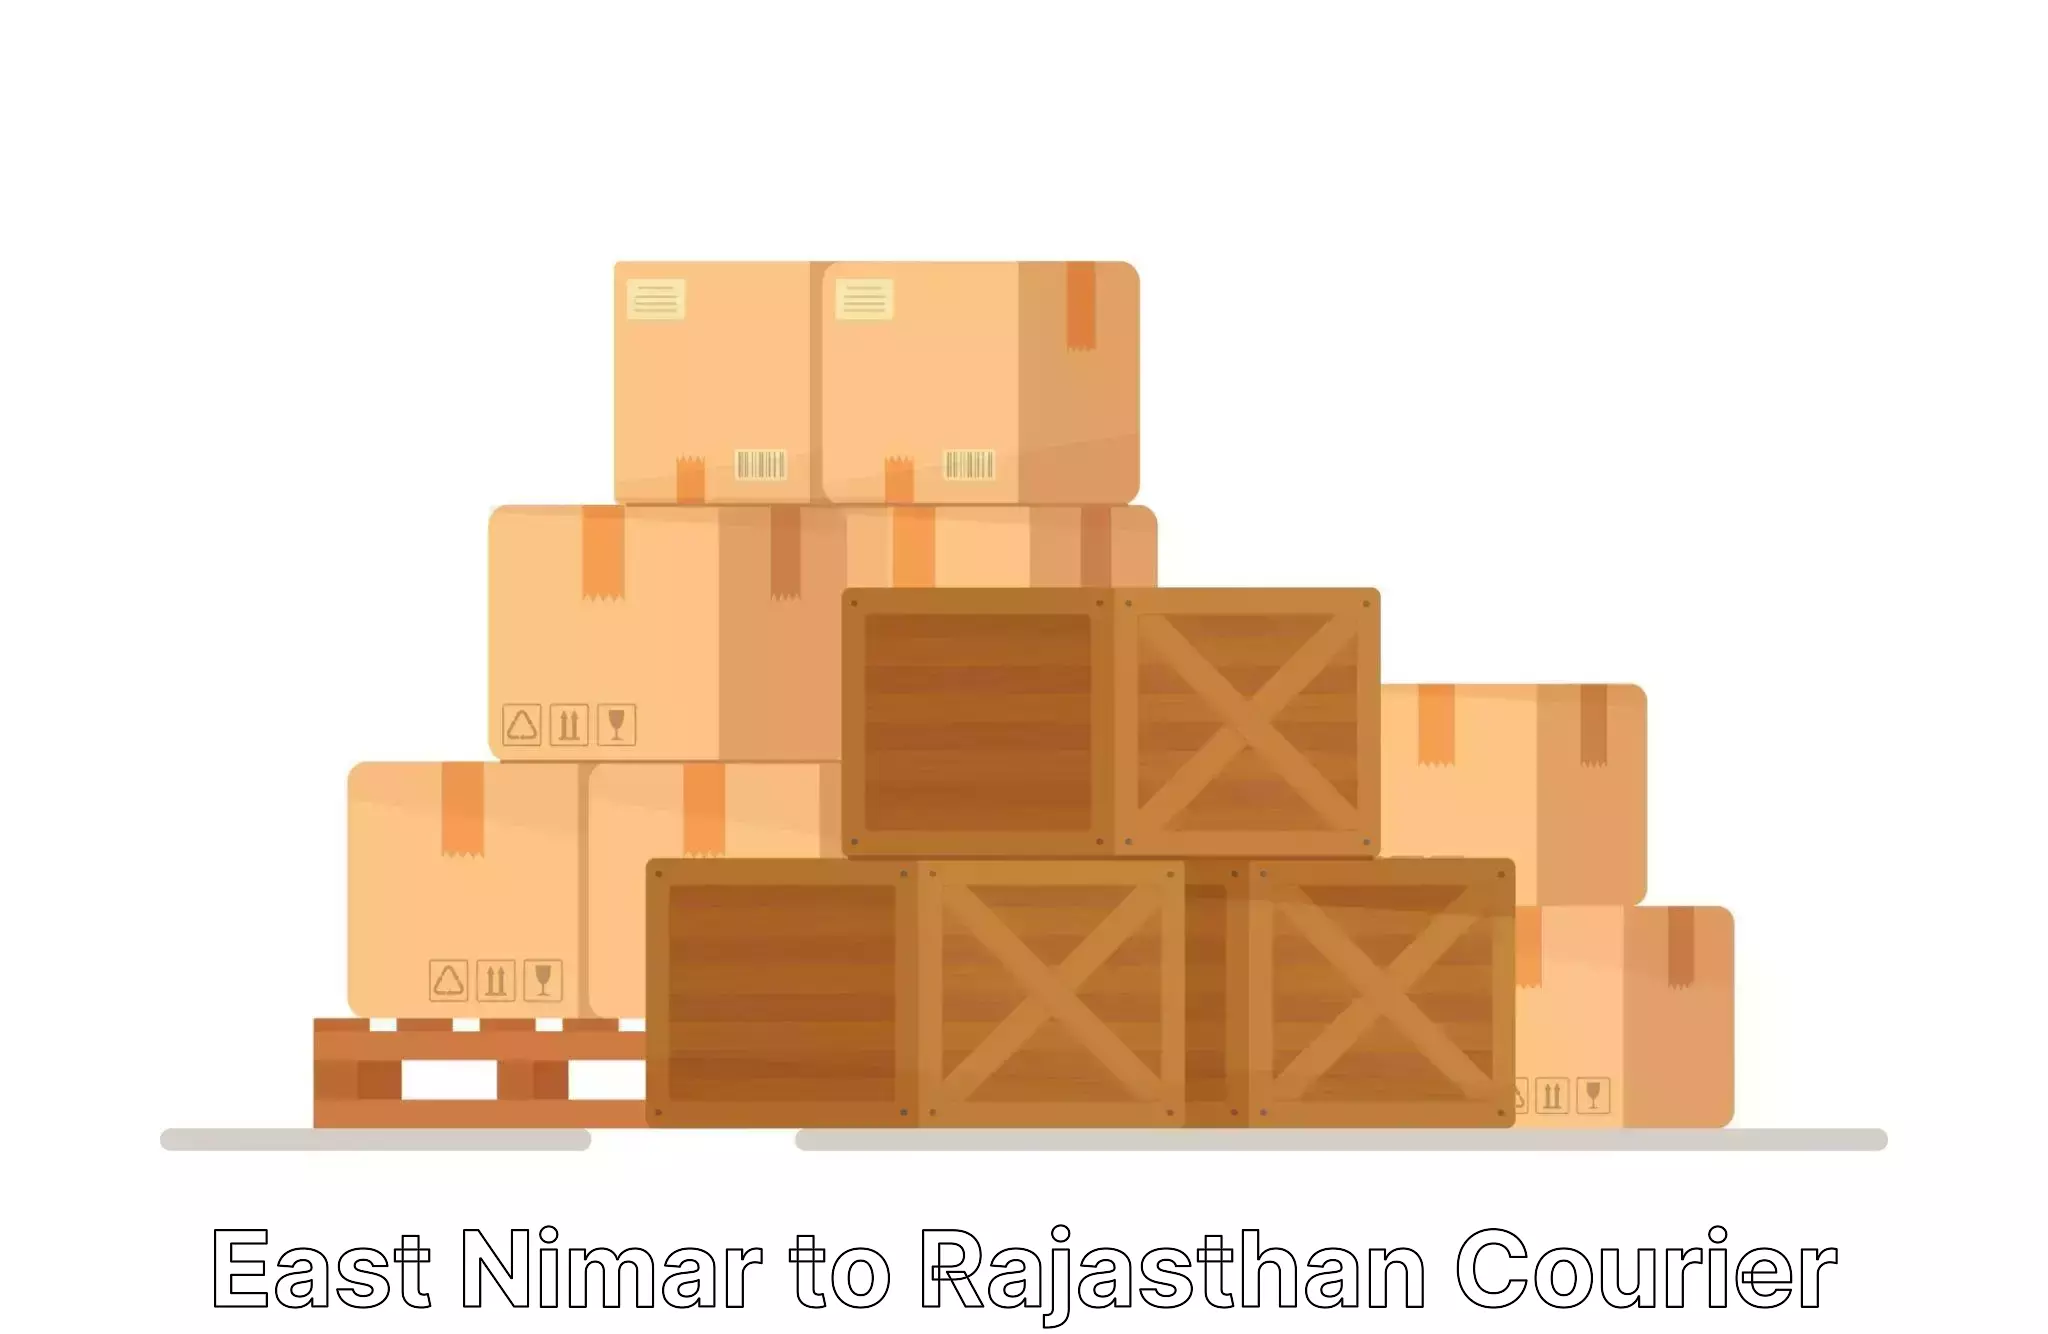 Budget-friendly movers East Nimar to Mathania